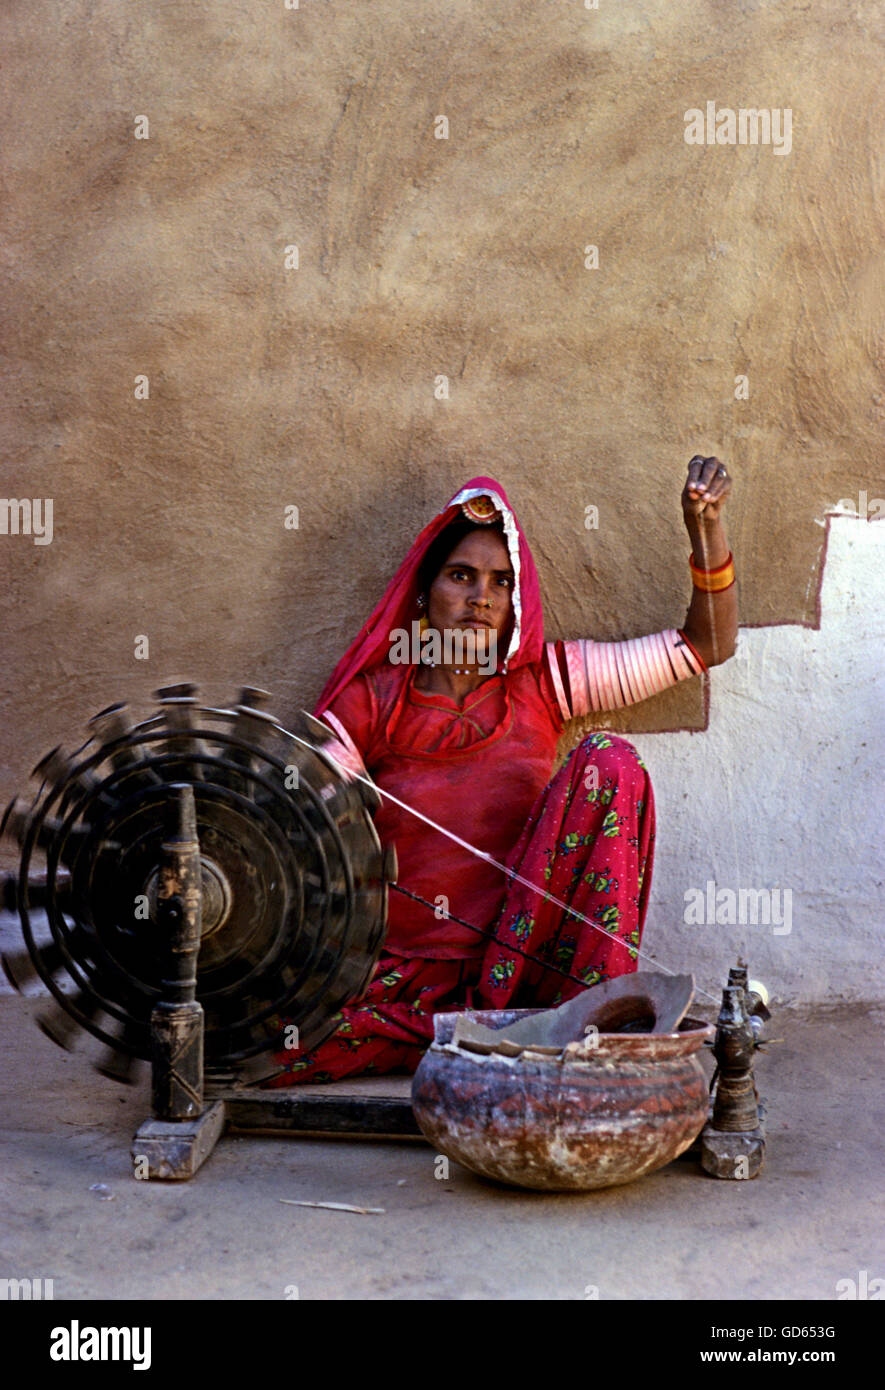 Woman and spinning wheel Stock Photo